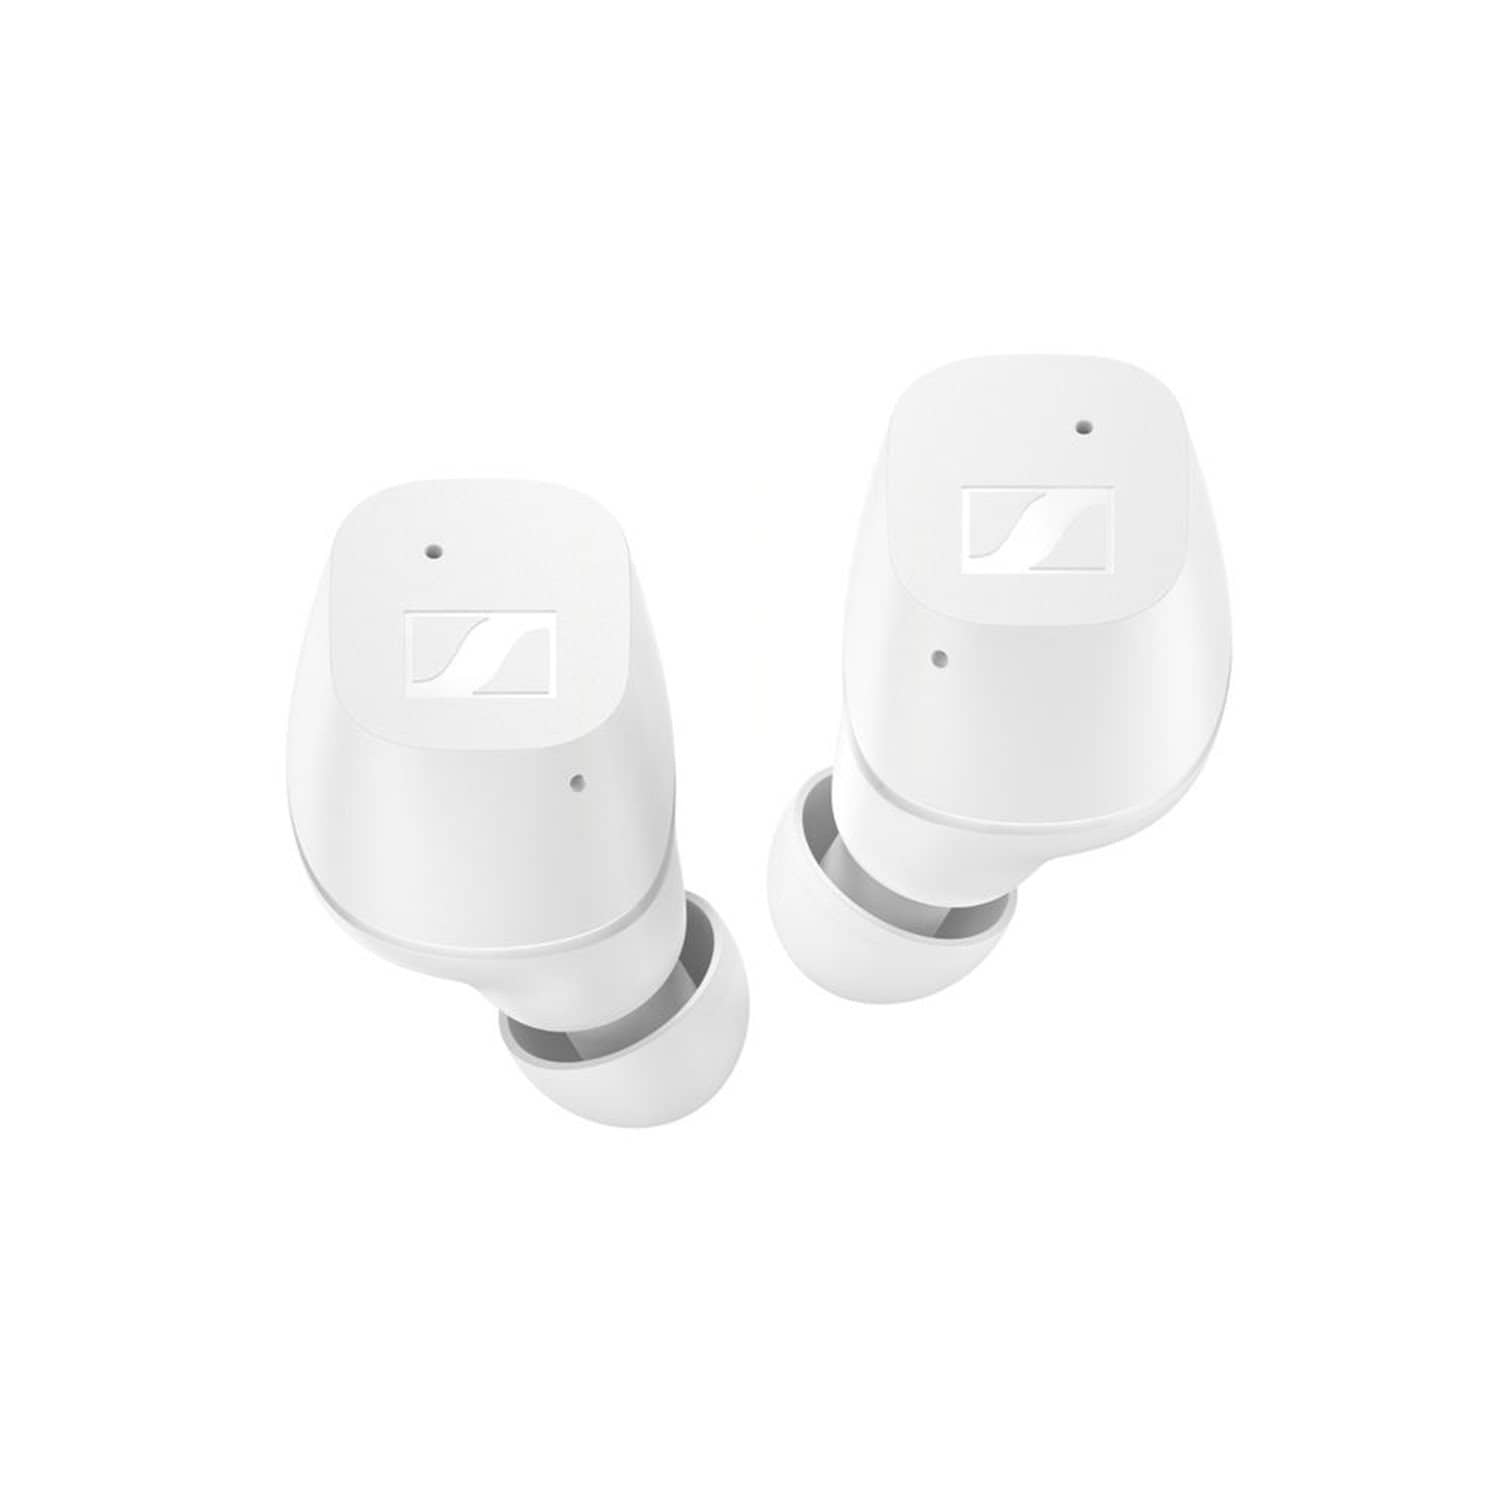 Sennheiser CX True Wireless Earbuds, Bluetooth In-Ear Headphones for Music and Calls With Passive Noise Cancellation, Customizable Touch Controls, Bass Boost, IPX4 and 27-Hour Battery Life - Toottoot Singapore